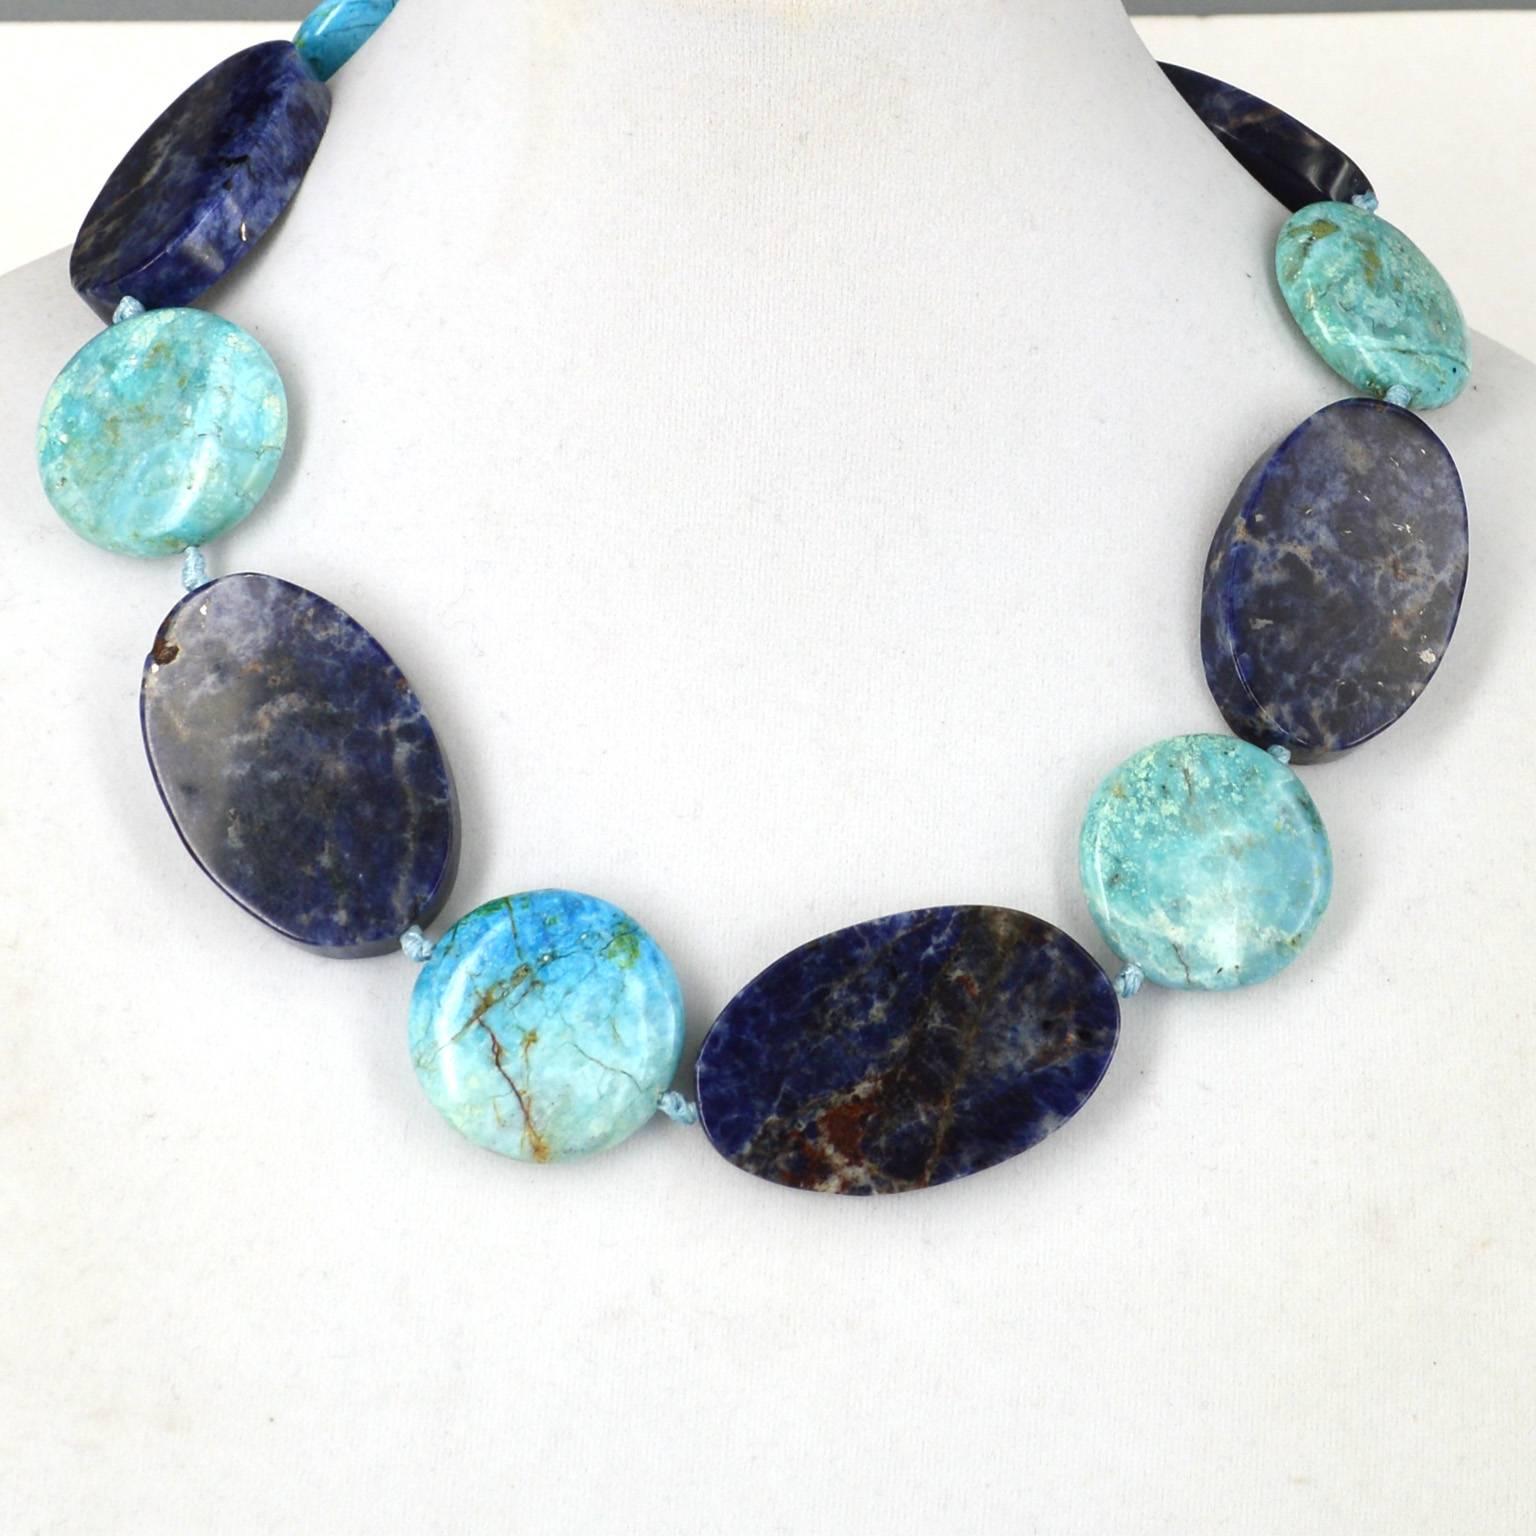 Large flat oval beads in 30x45mm Sodalite with 30mm round African Blue Opal hand knotted on Aqua coloured thread for strength and durability, with a 29cm Sterling silver hook clasp.
Finished necklace measures 49cm